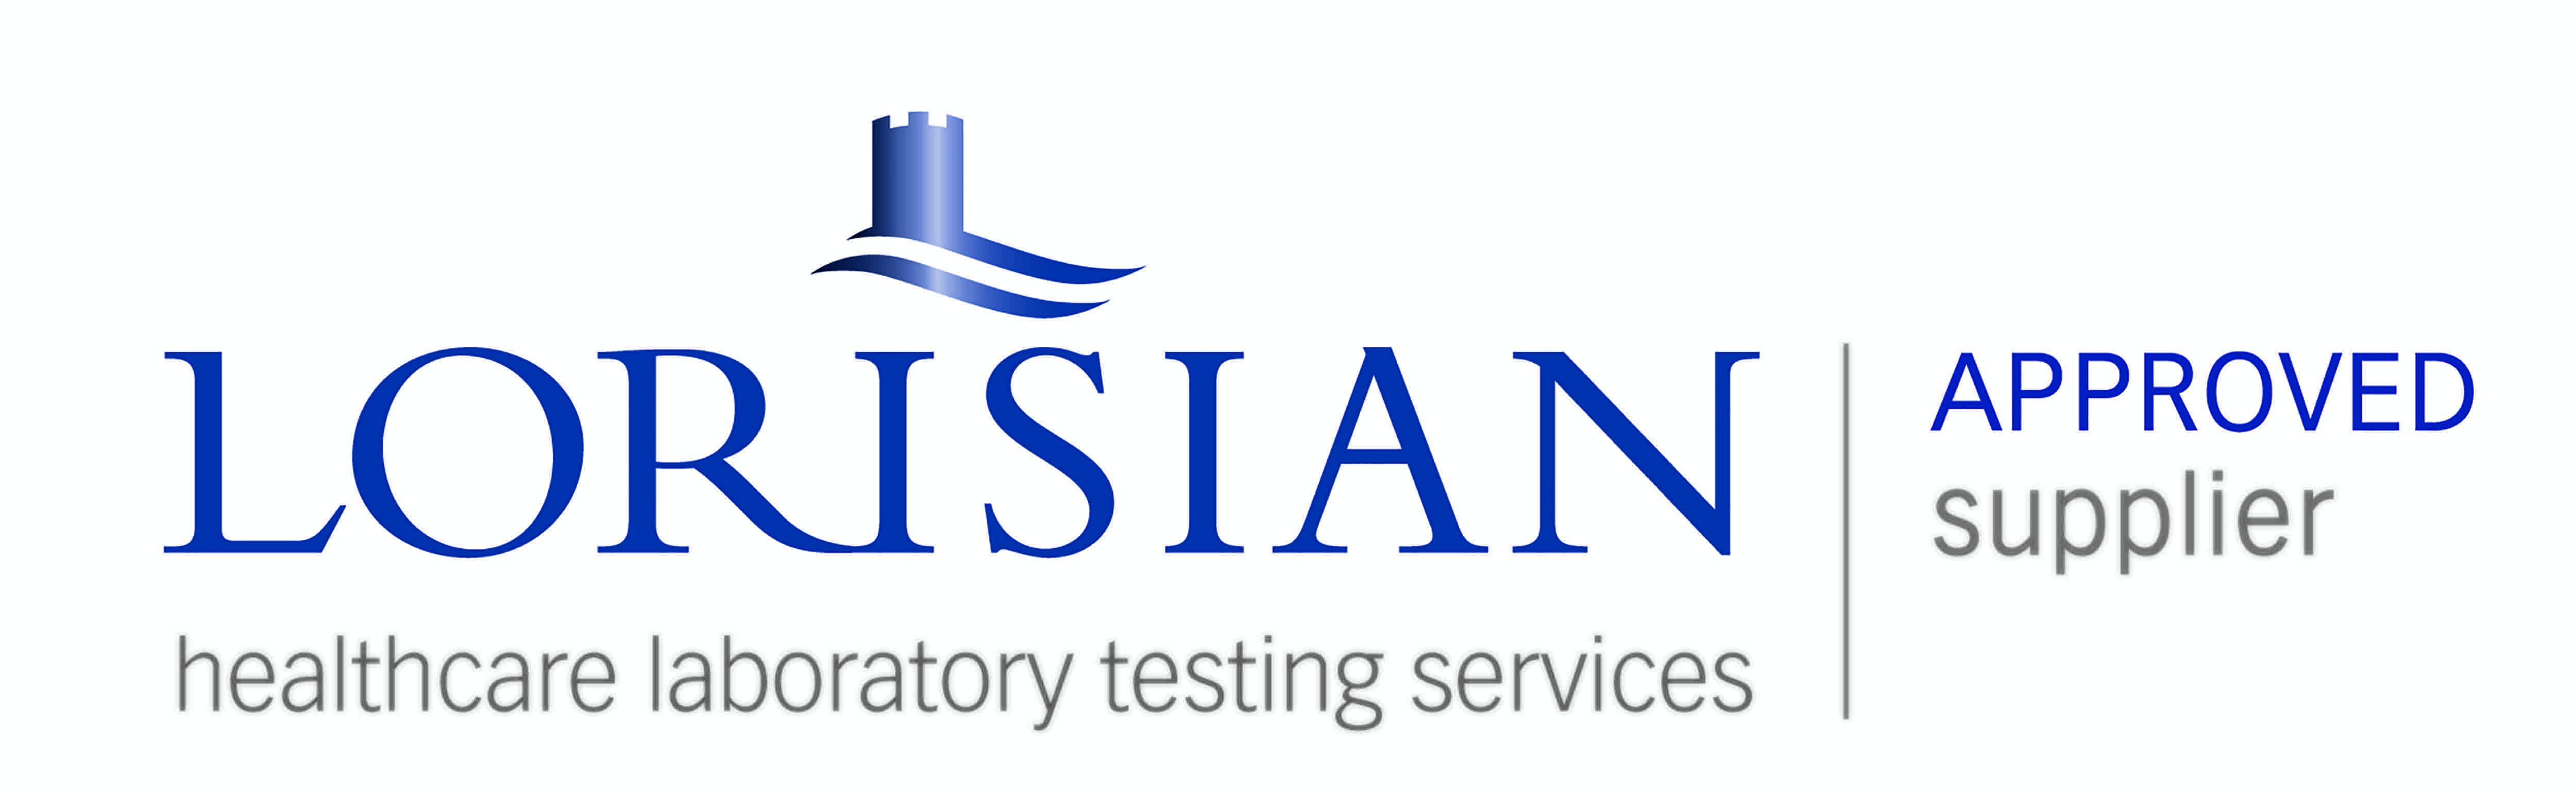 Lorisian Intolerance Testing - Approved Supplier